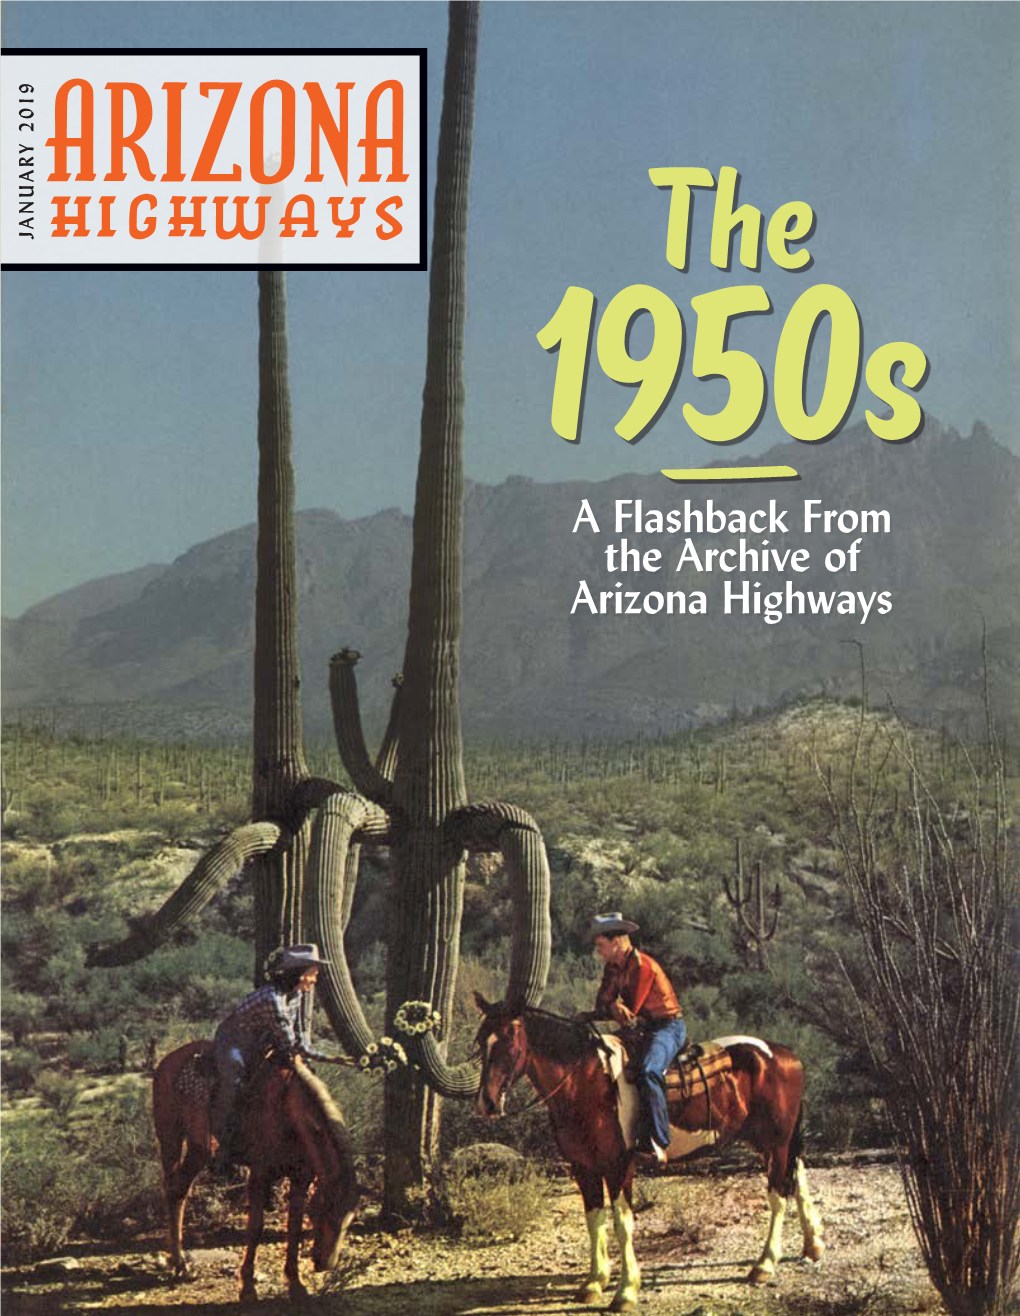 A Flashback from the Archive of Arizona Highways